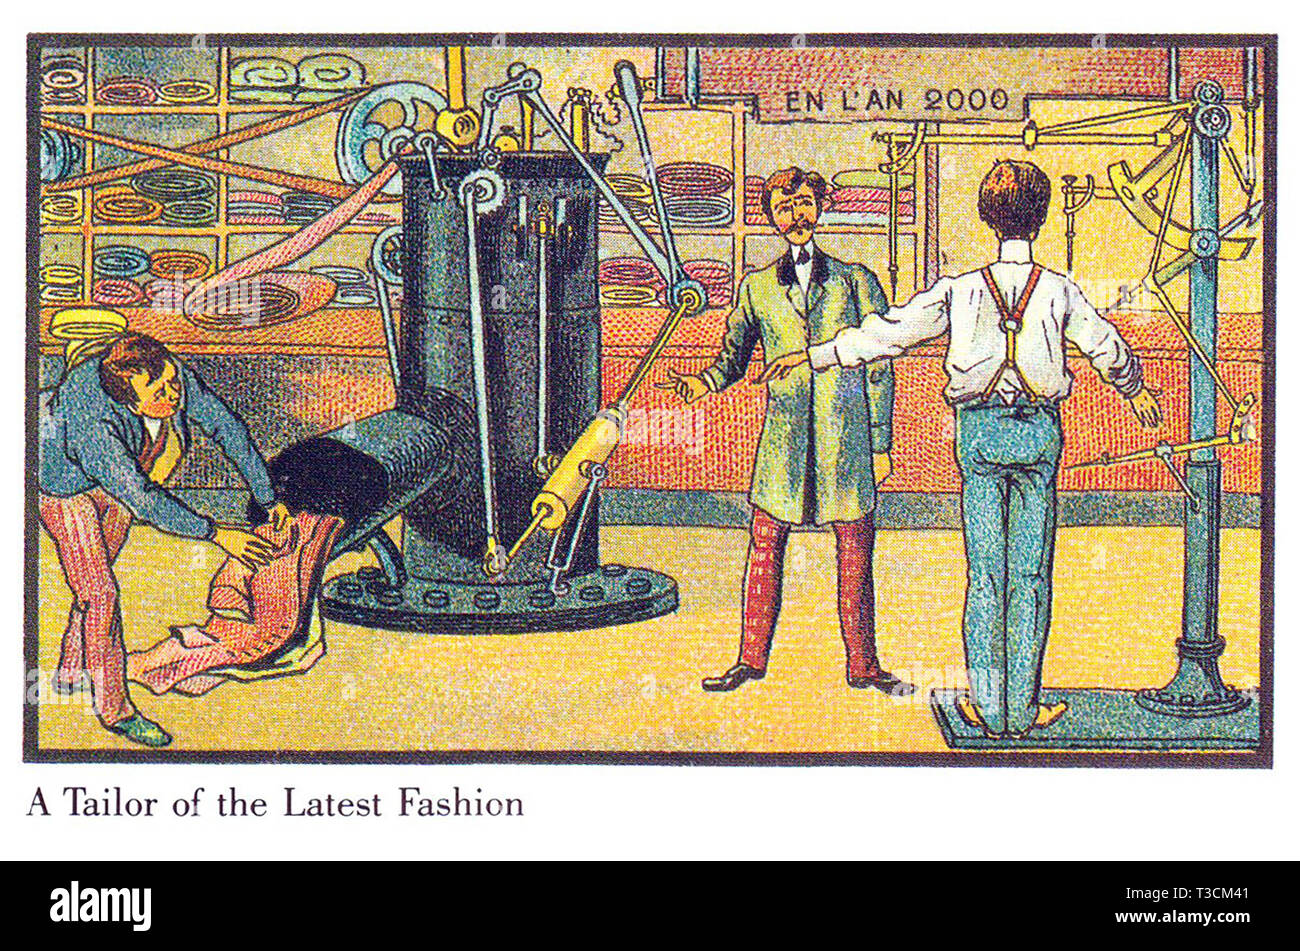 IN THE YEAR 2000  Series of French illustrations published between 1899 and 1910 showing imaginary technological advances. The latest fashions for men automatically produced. Stock Photo